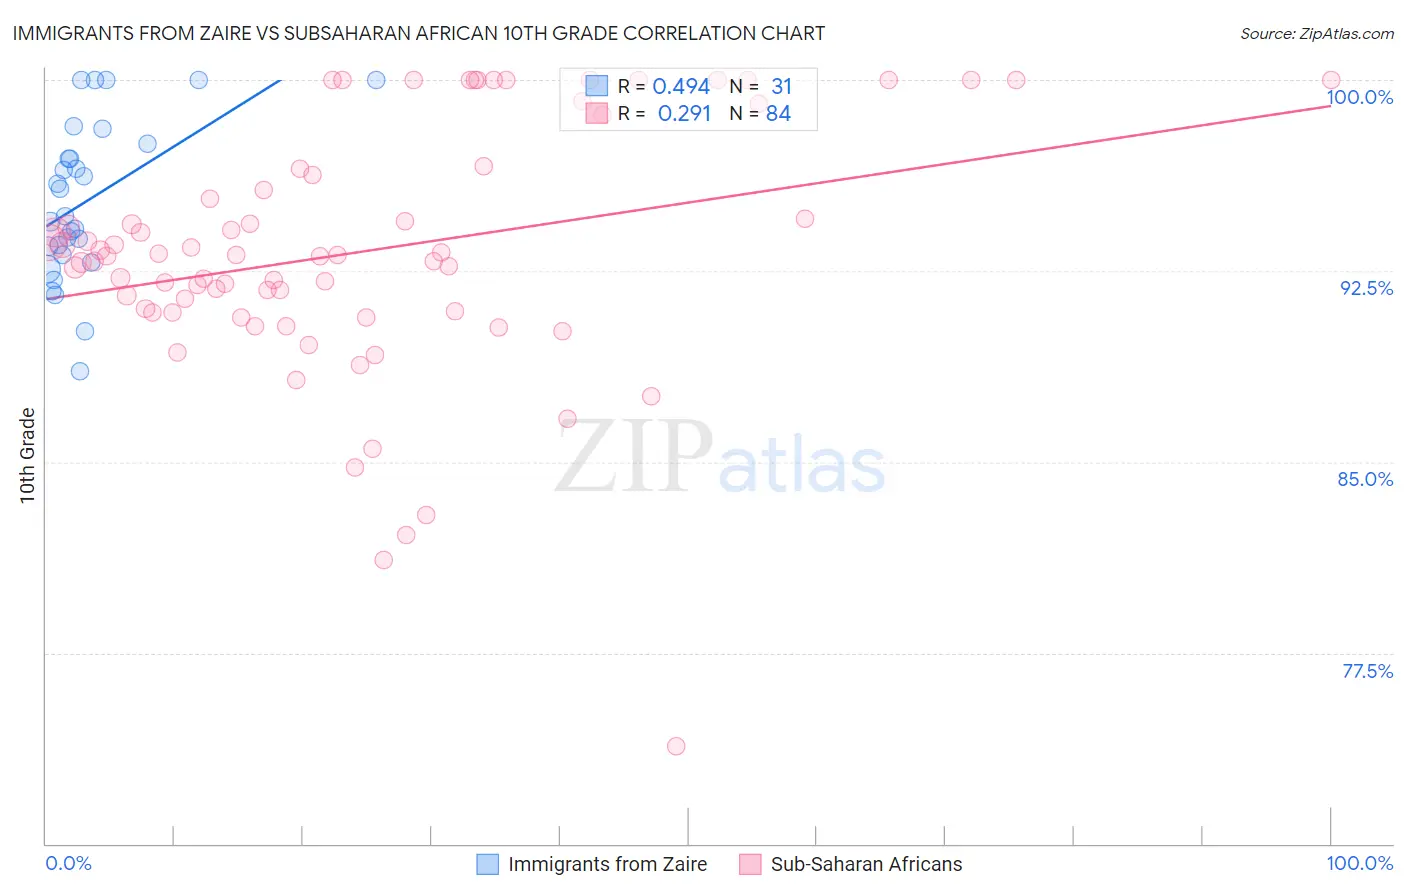 Immigrants from Zaire vs Subsaharan African 10th Grade